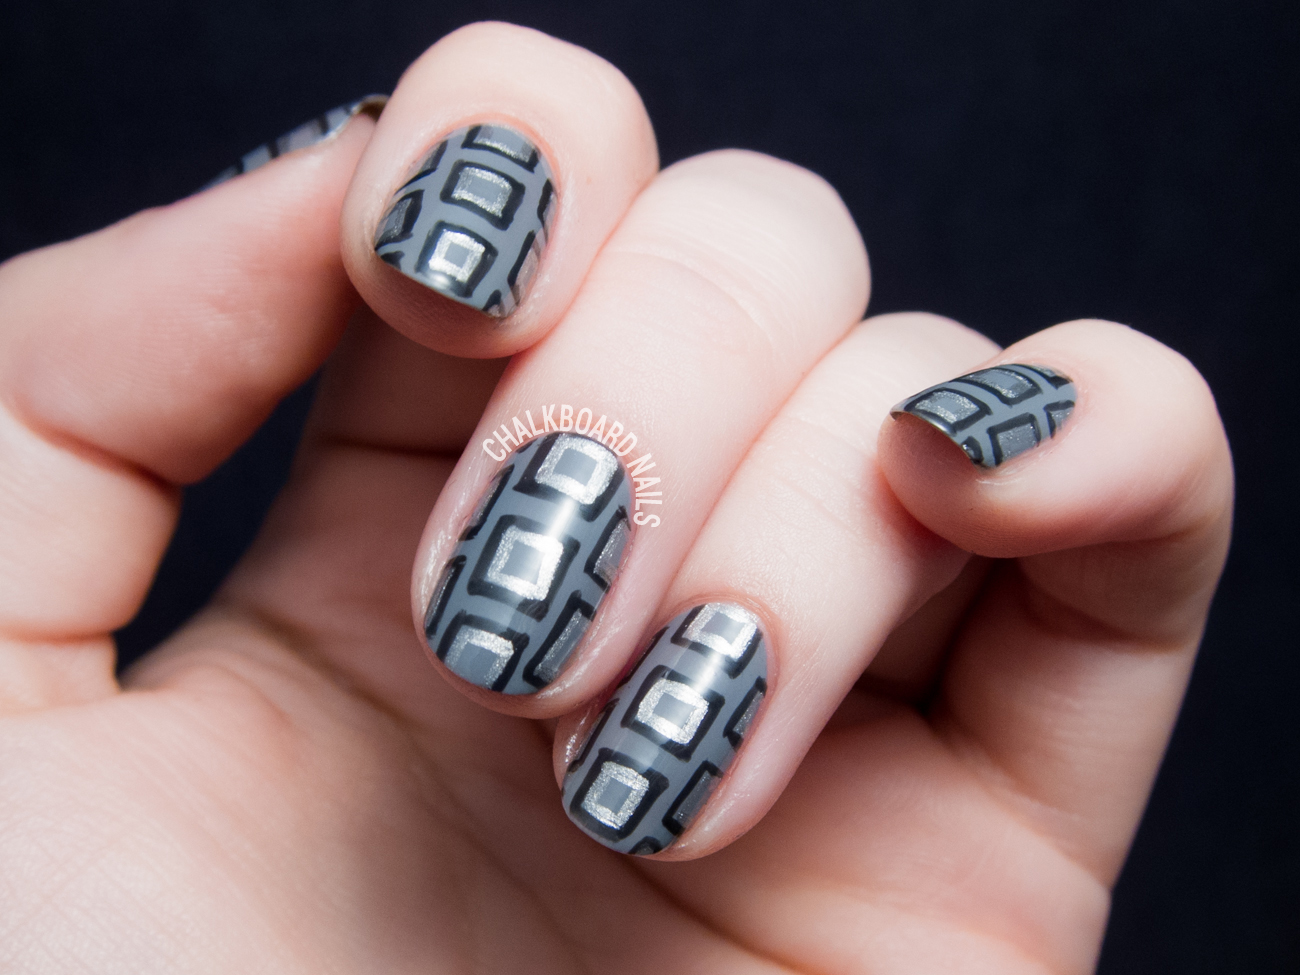 3. Geometric Grey Nail Design with Negative Space - wide 8